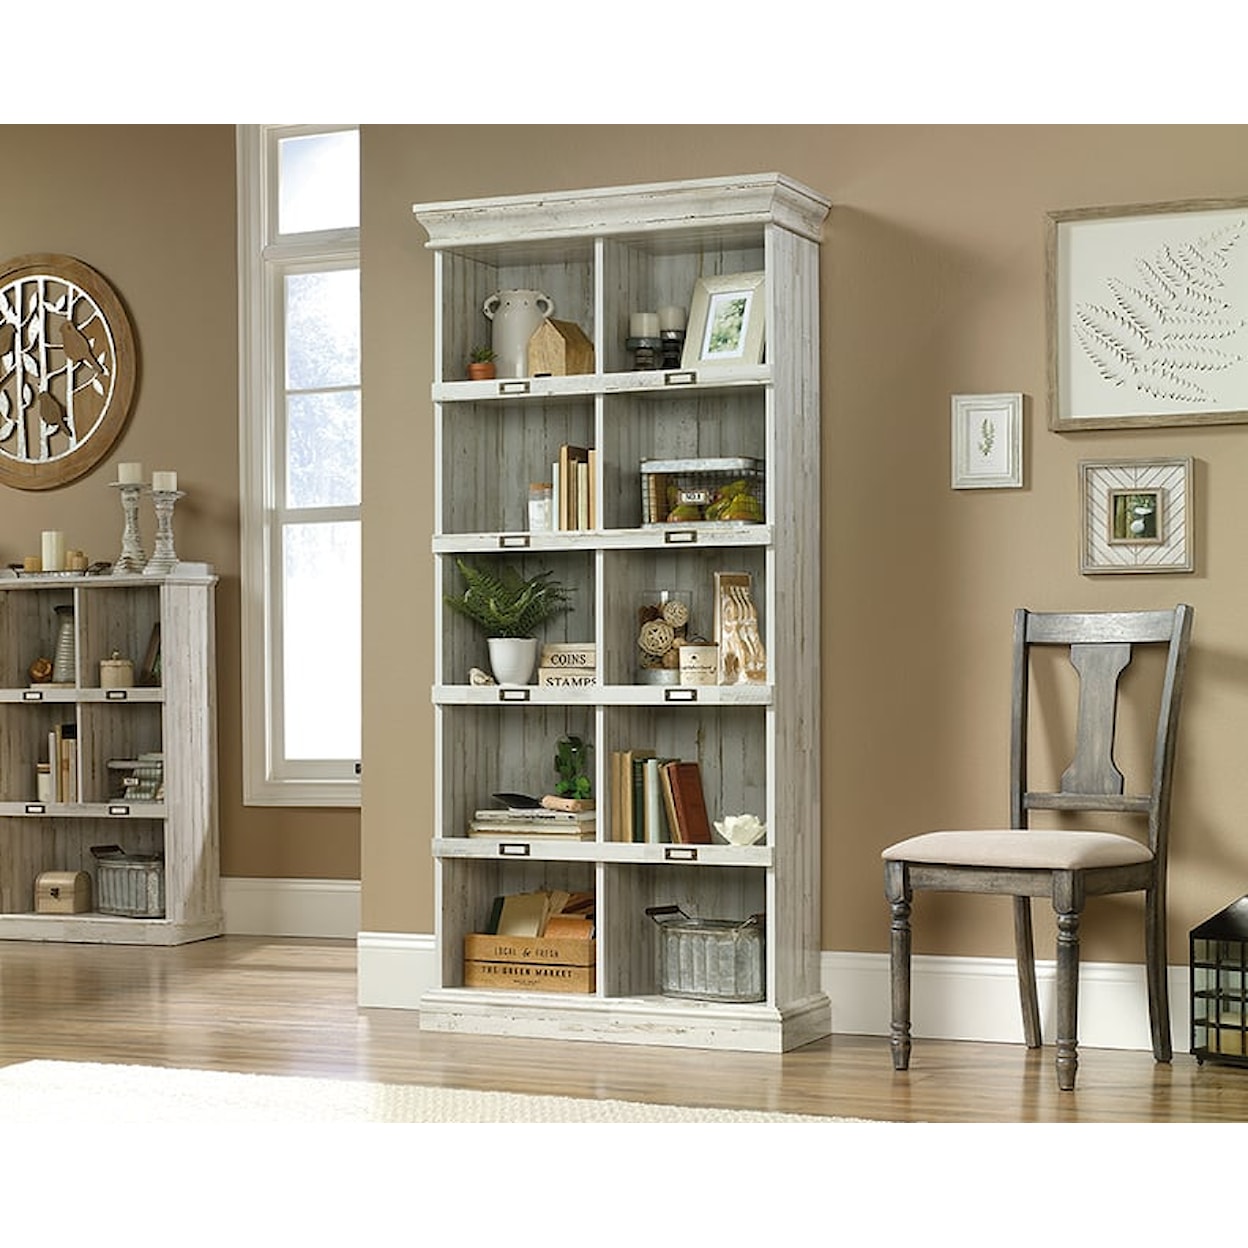 Sauder Barrister Lane Tall Bookcase with Open Shelving